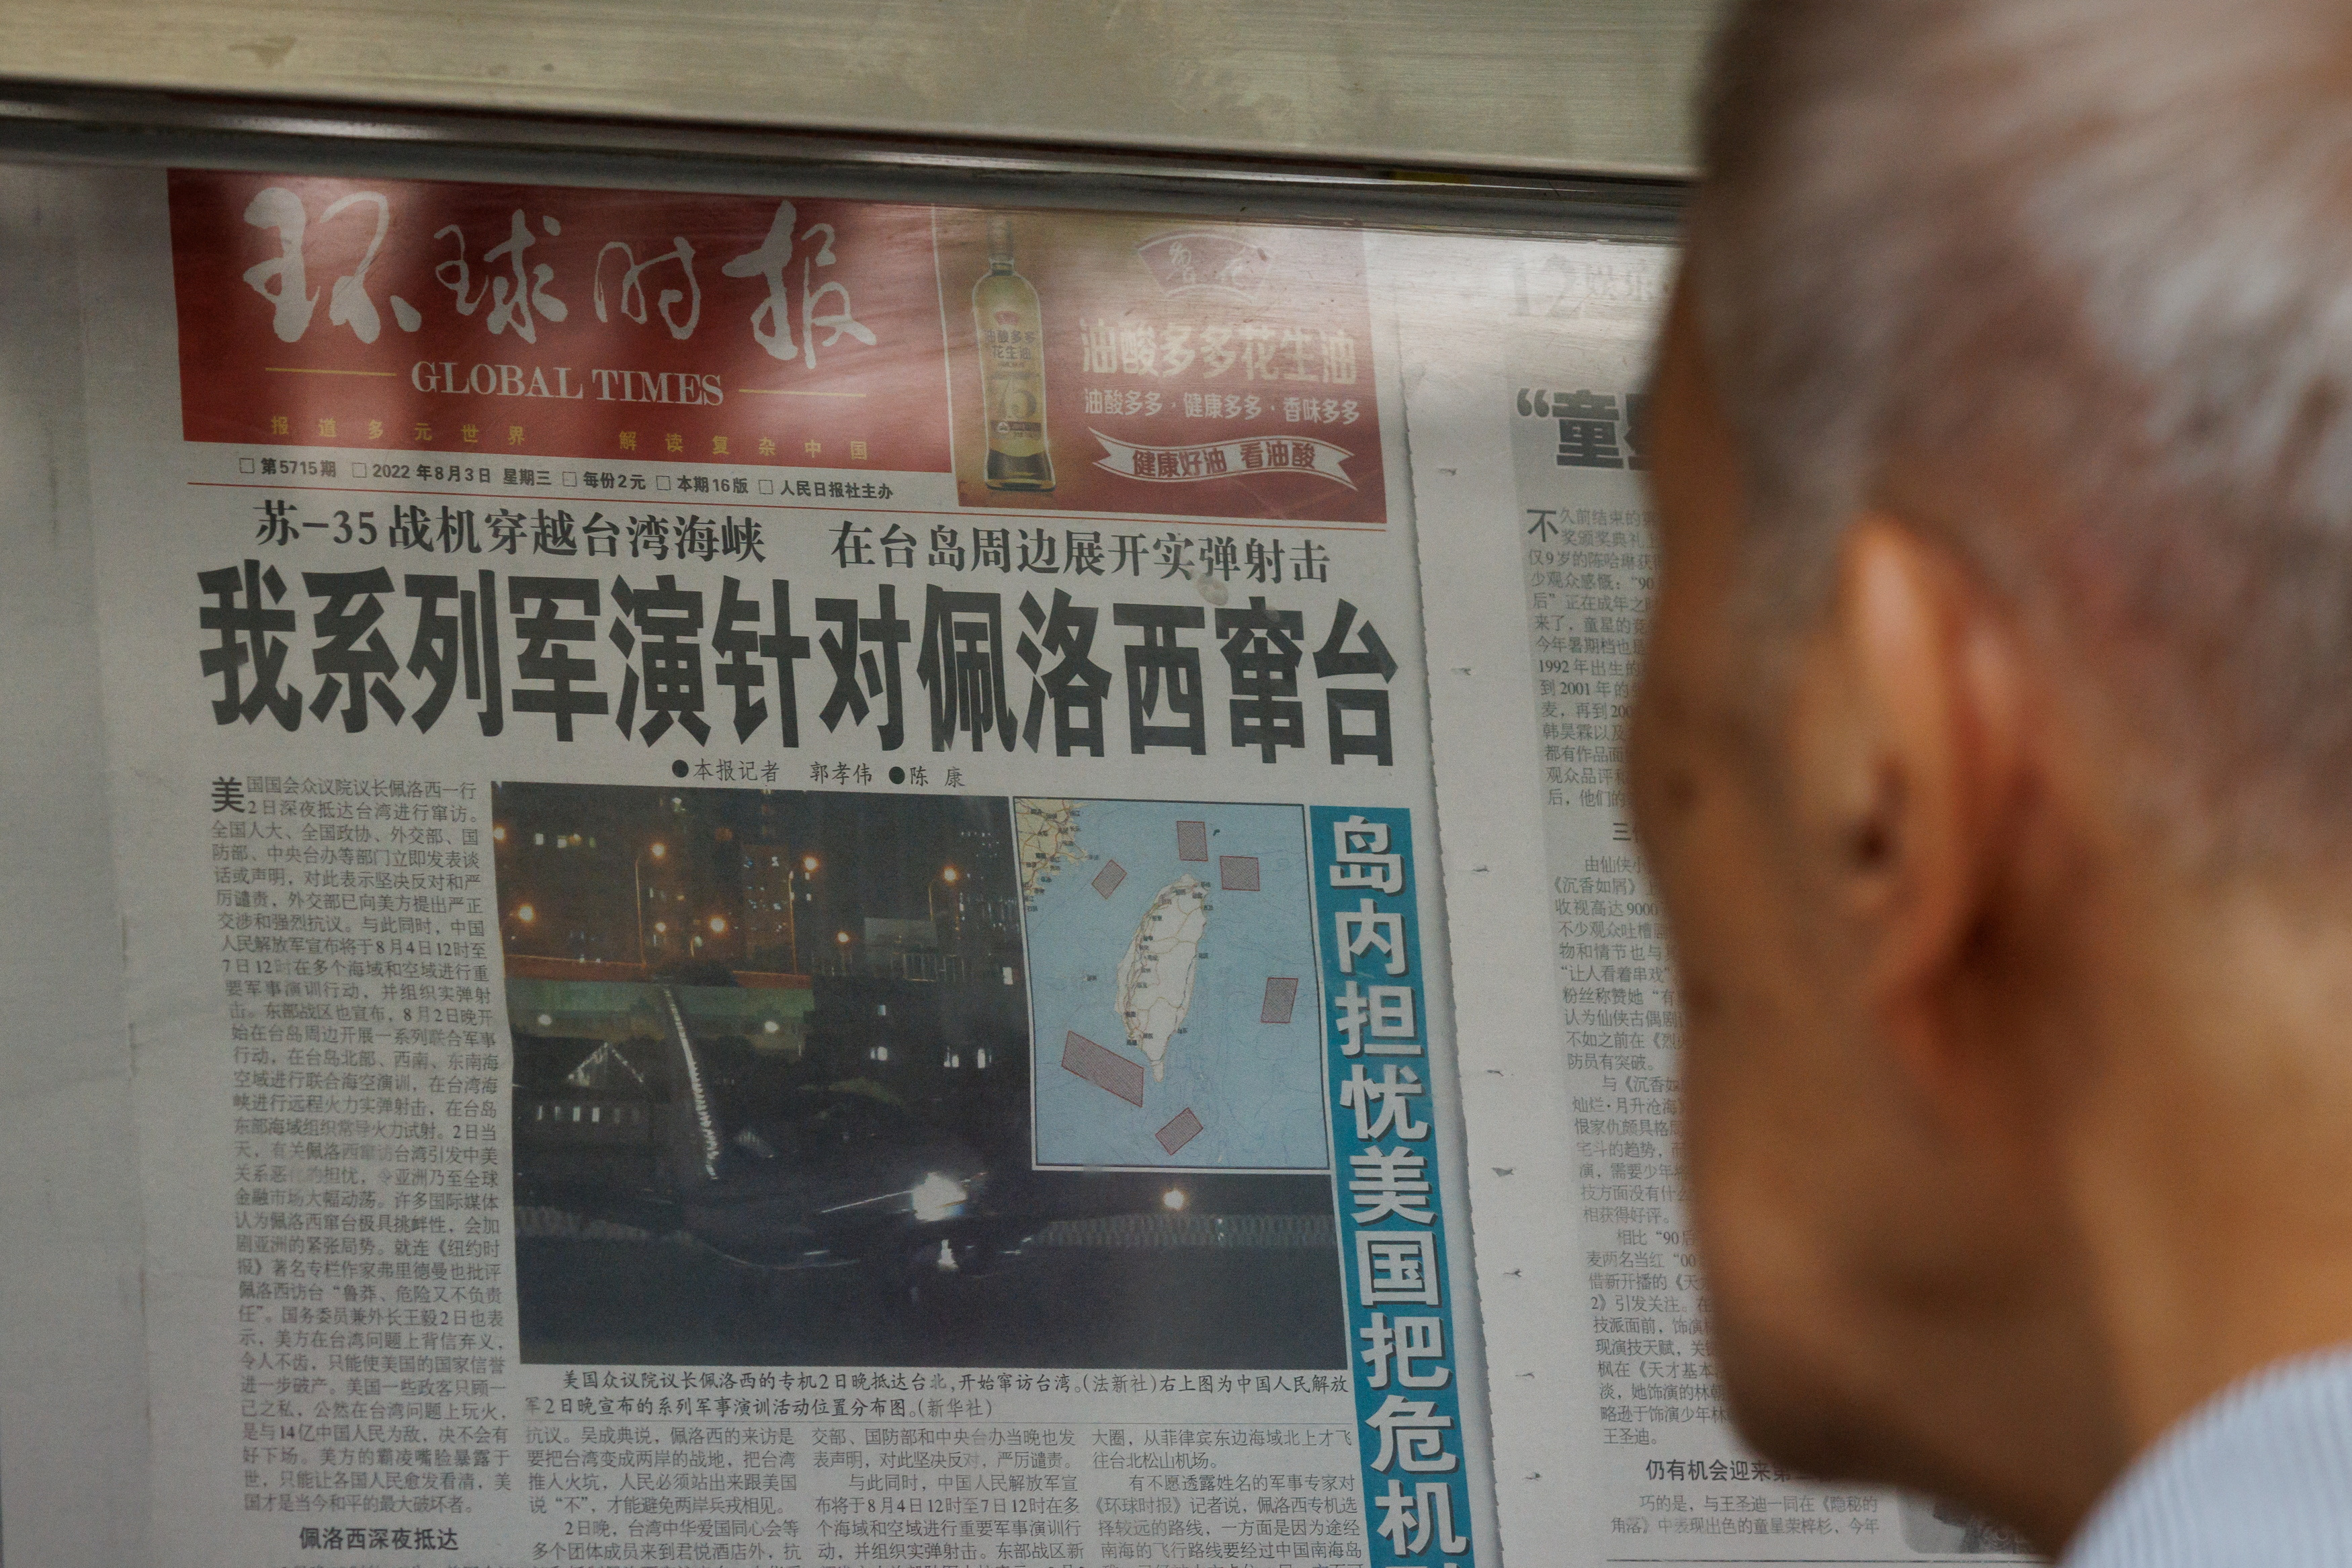 A man reads a Global Times article about military exercises by the Chinese People's Liberation Army (PLA) following U.S. House of Representatives Speaker Pelosi's Taiwan visit, at a newspaper stand in Beijing